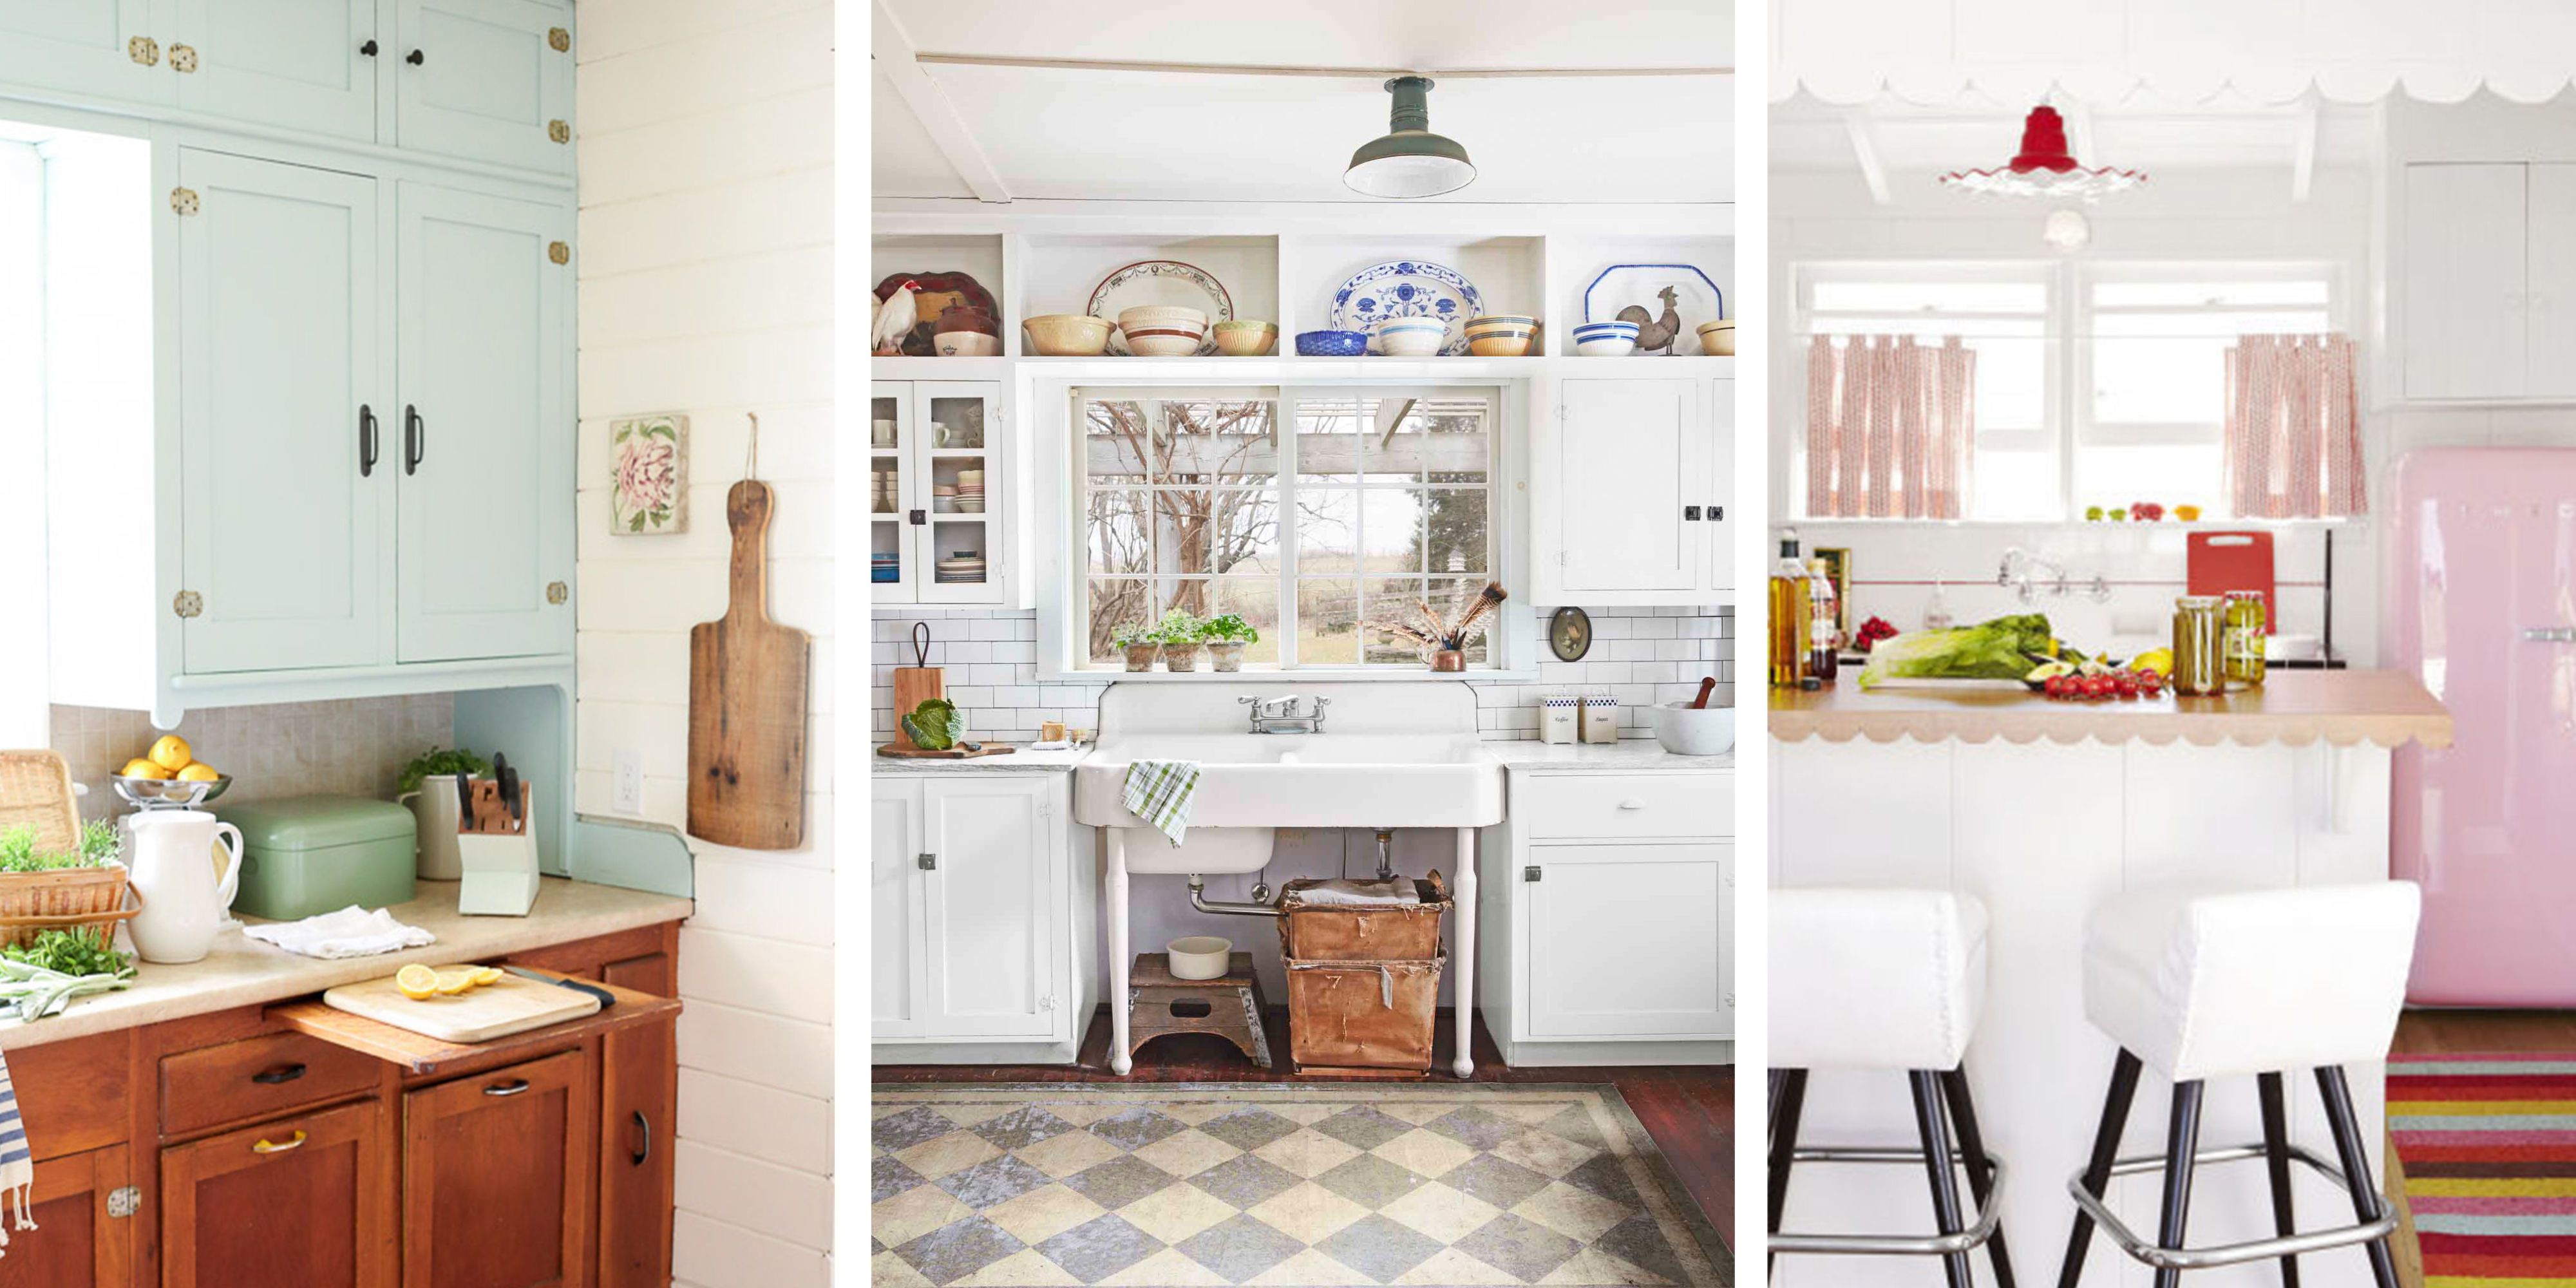 Vintage Kitchen: Artistic And Beautiful